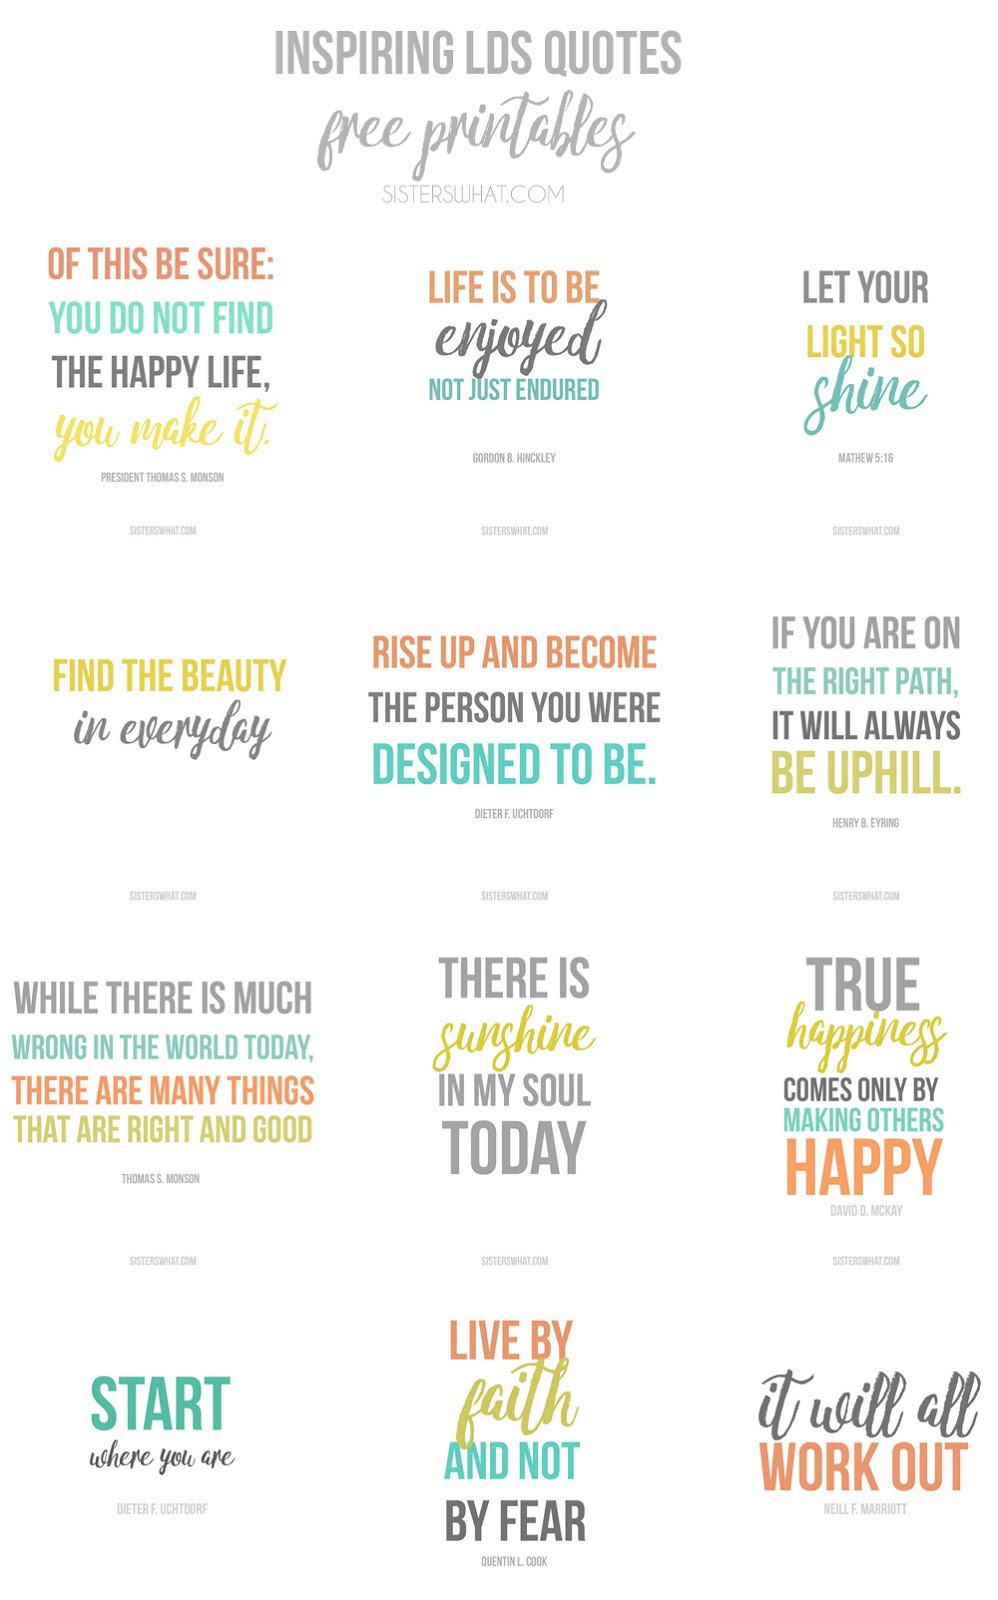 Free Printable Inspirational Quotes
 free printables for lds quotes